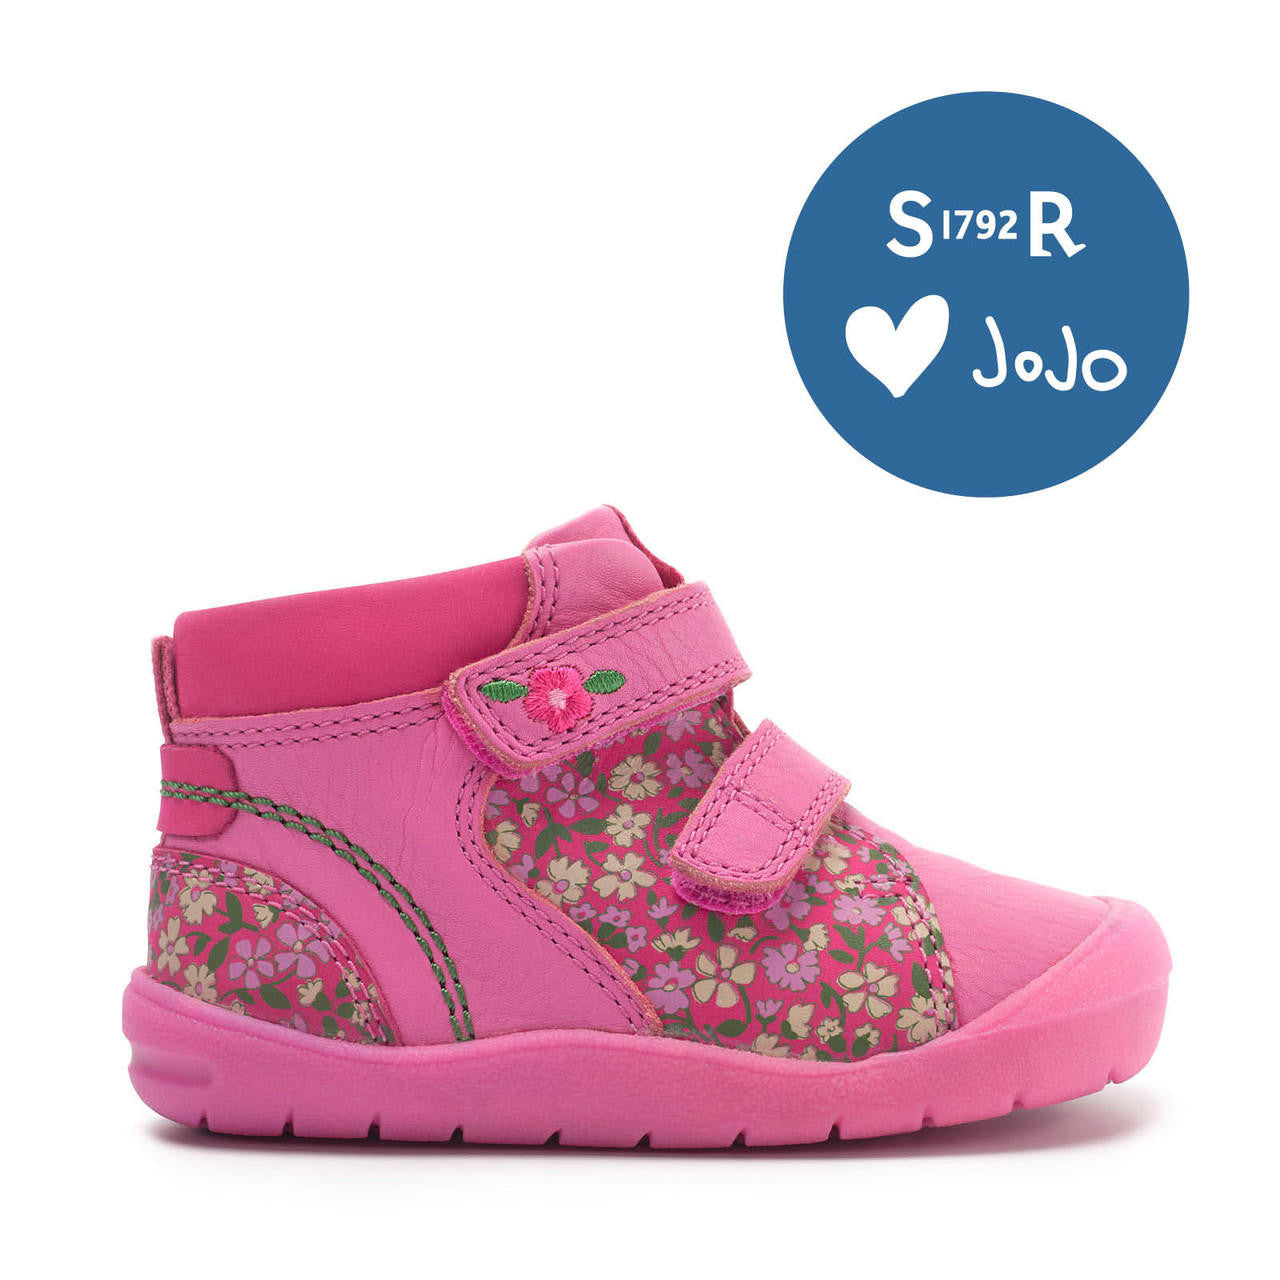 A girls boot by Start Rite and JoJo Maman Bebé collaboration, style Play Date  in Pink Leather and Floral Nubuck, with double velcro fastening and padded ankle. Right side view.